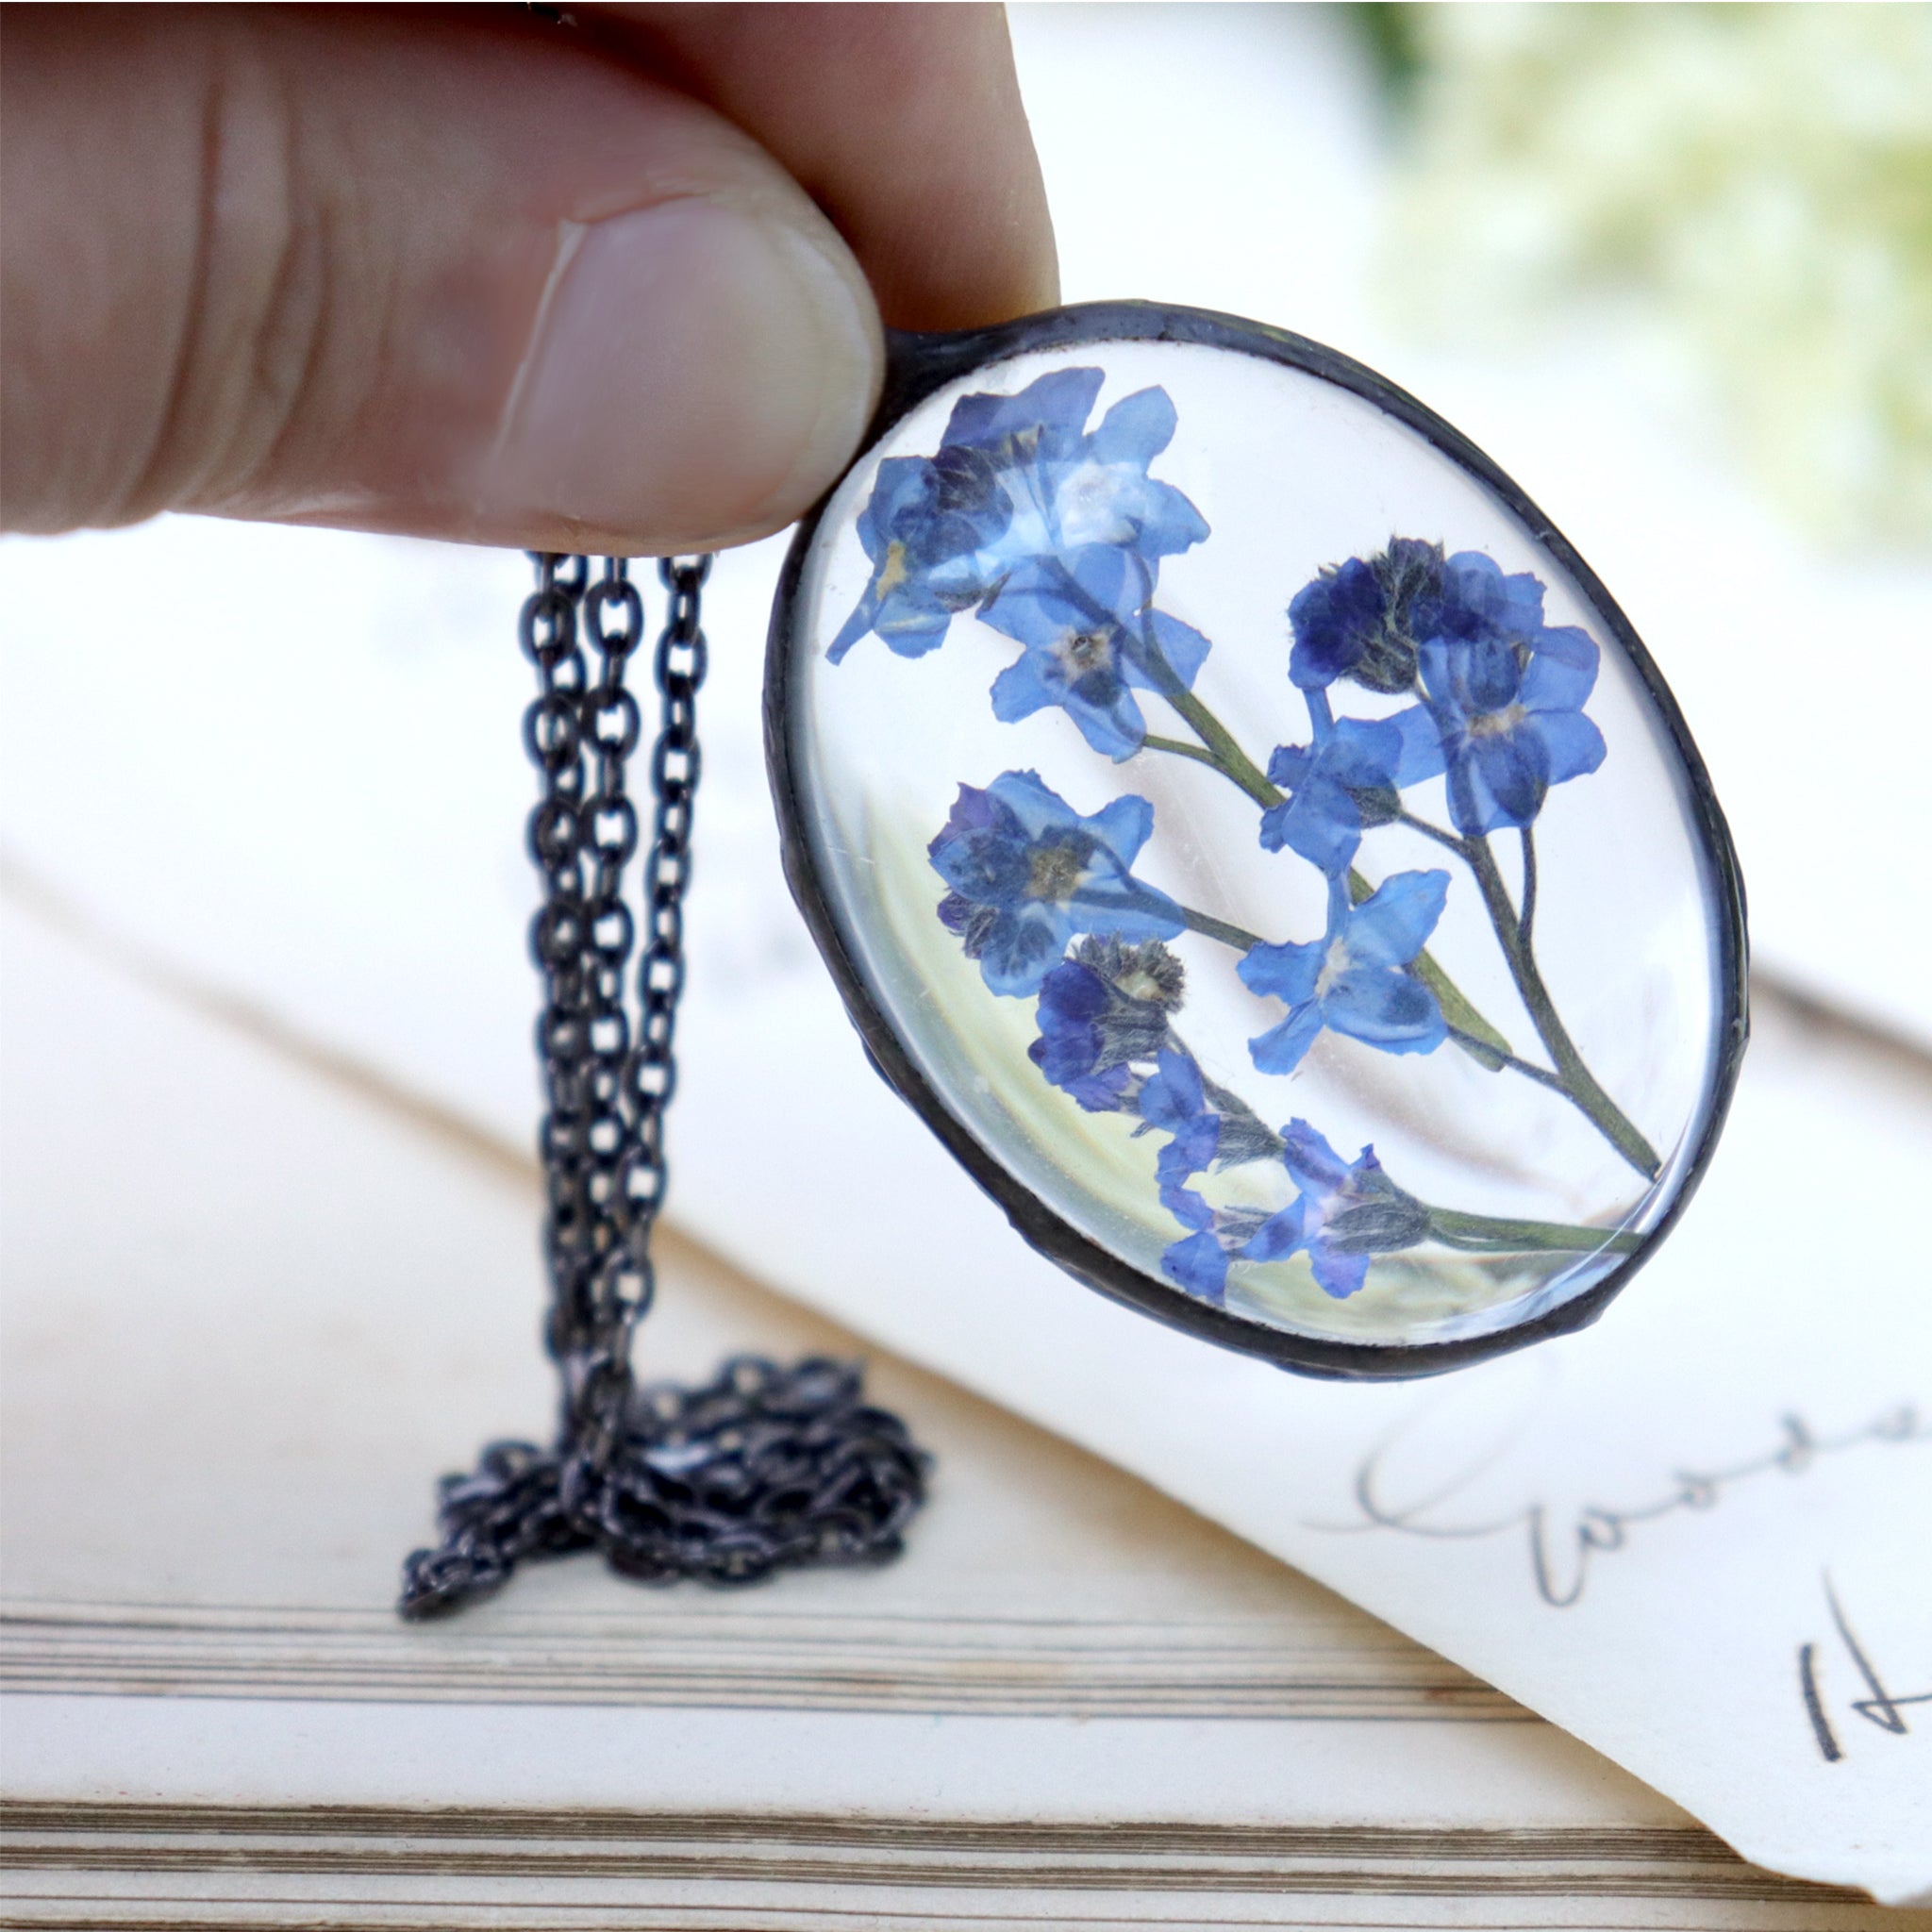 Forget-me-not oval shaped necklace being hold between thumb and index